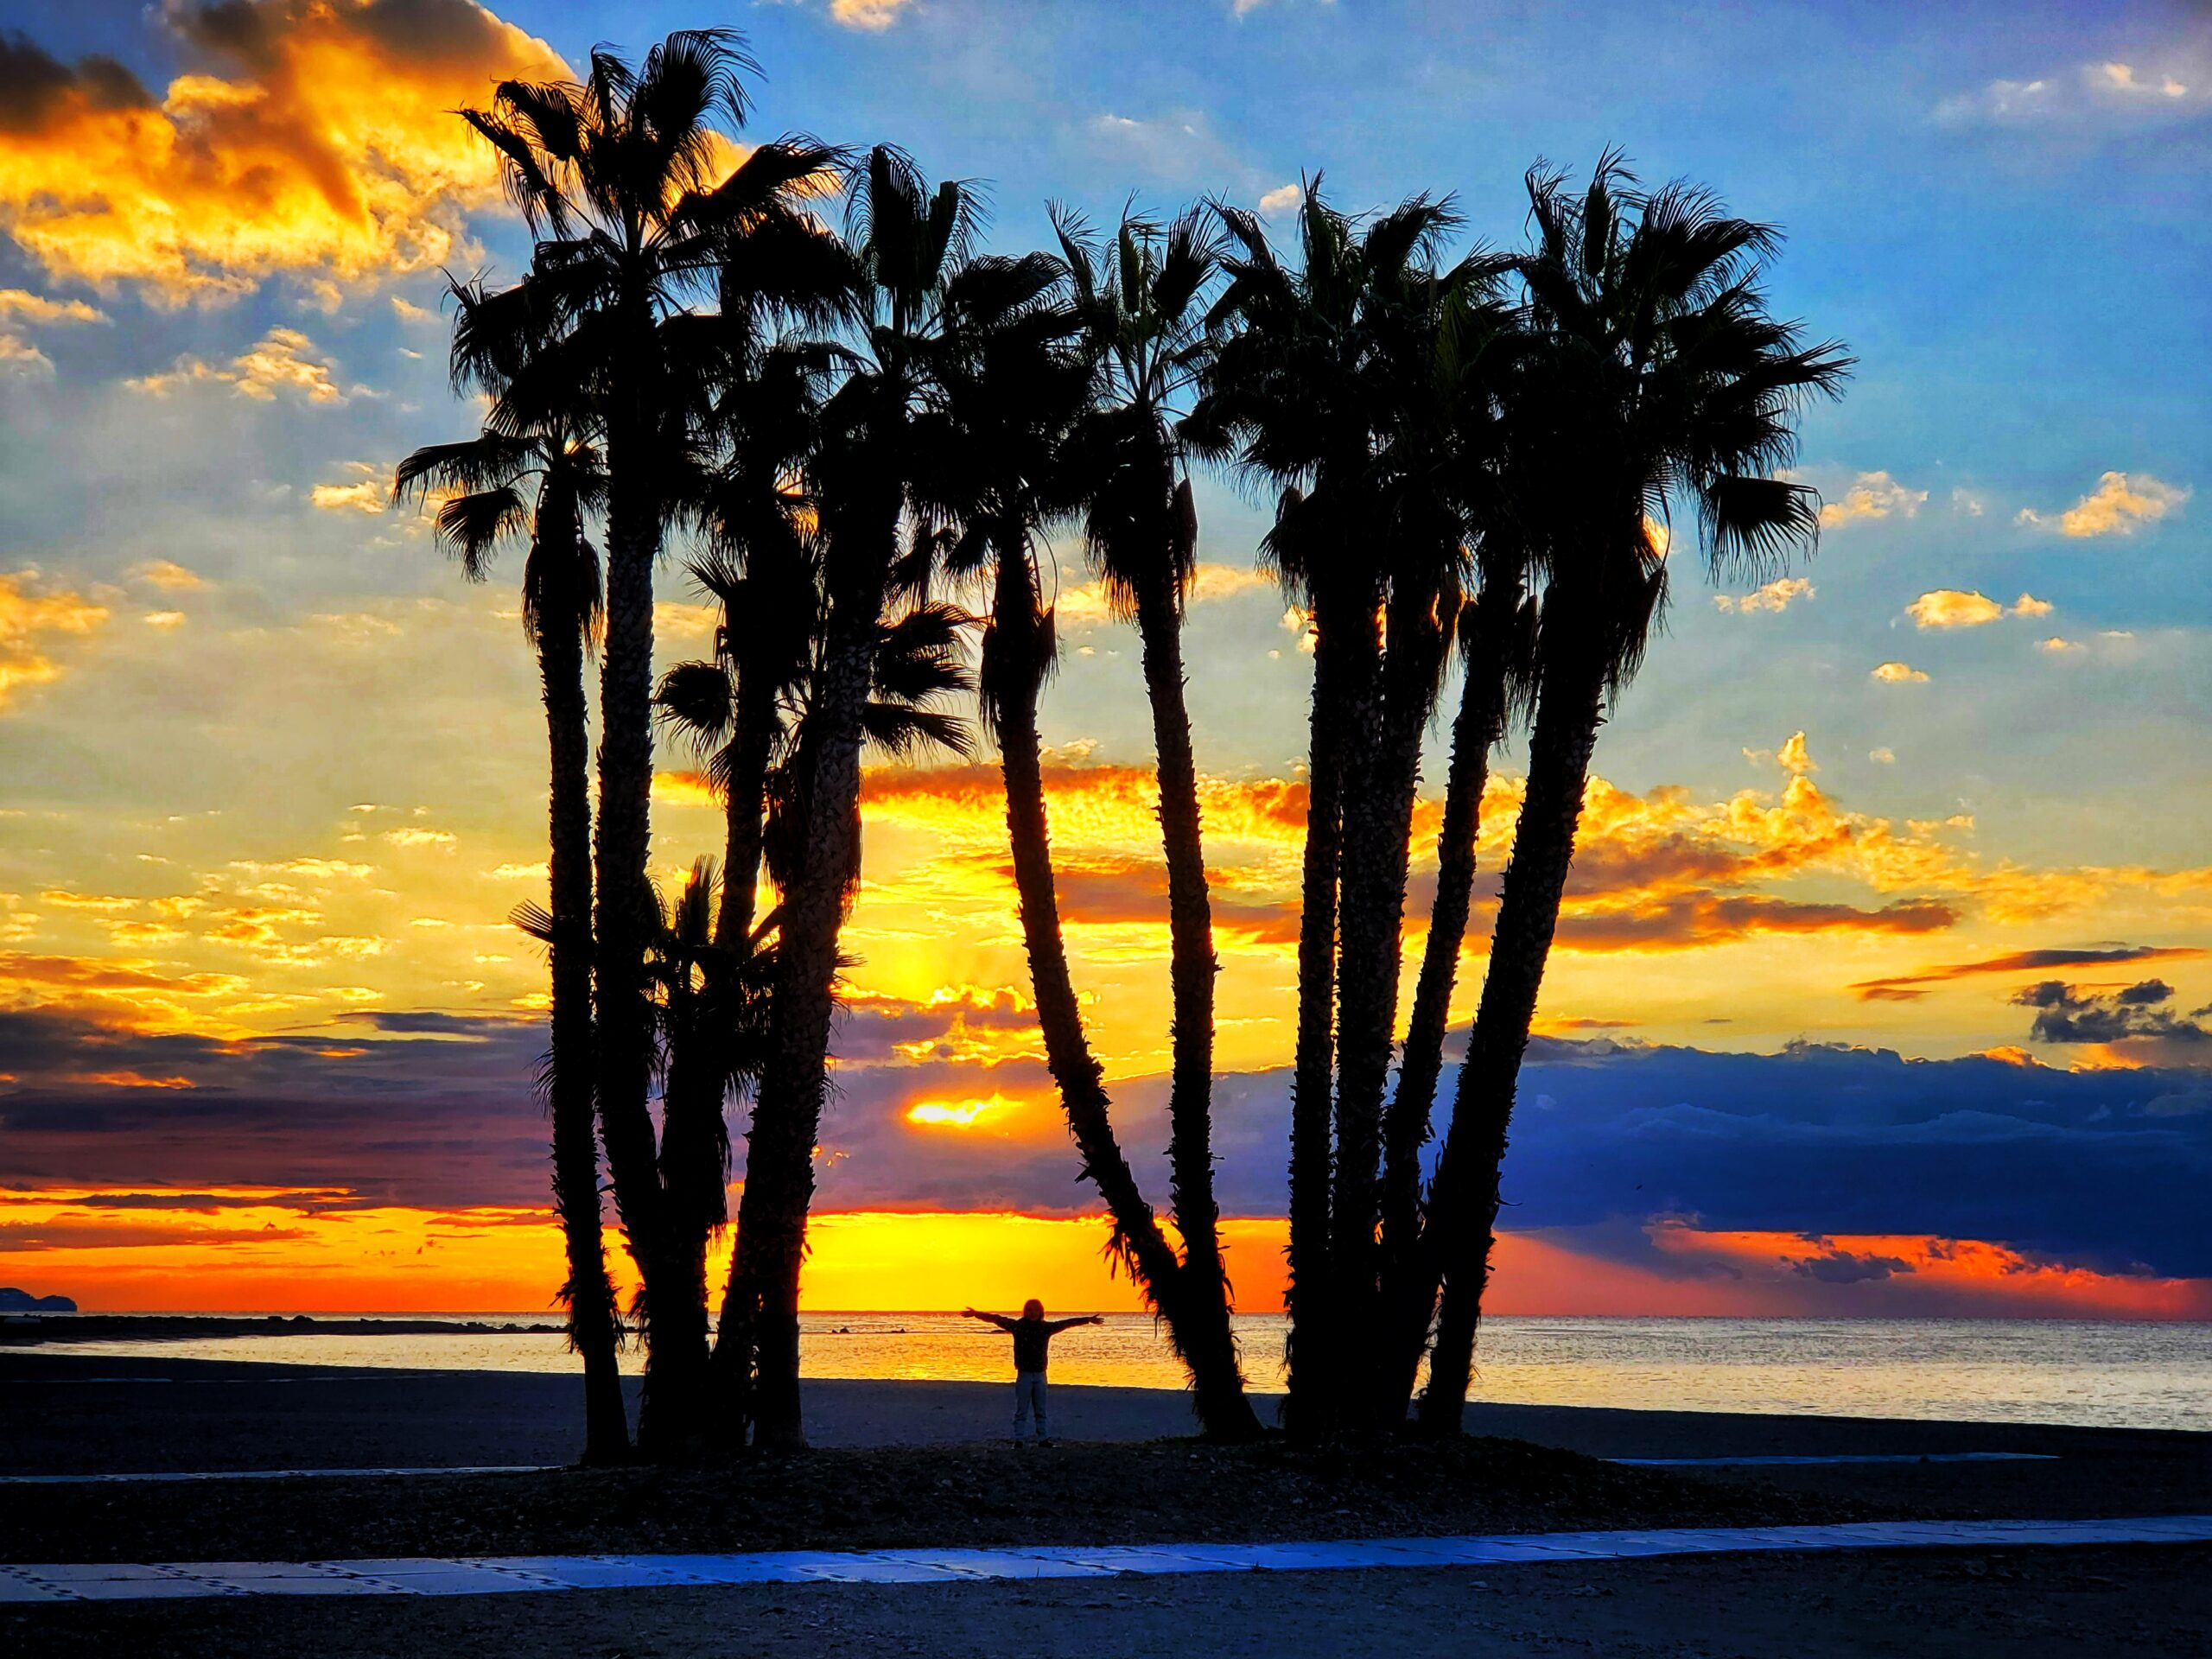 palm trees silhouetted against sunset sky. person between trees